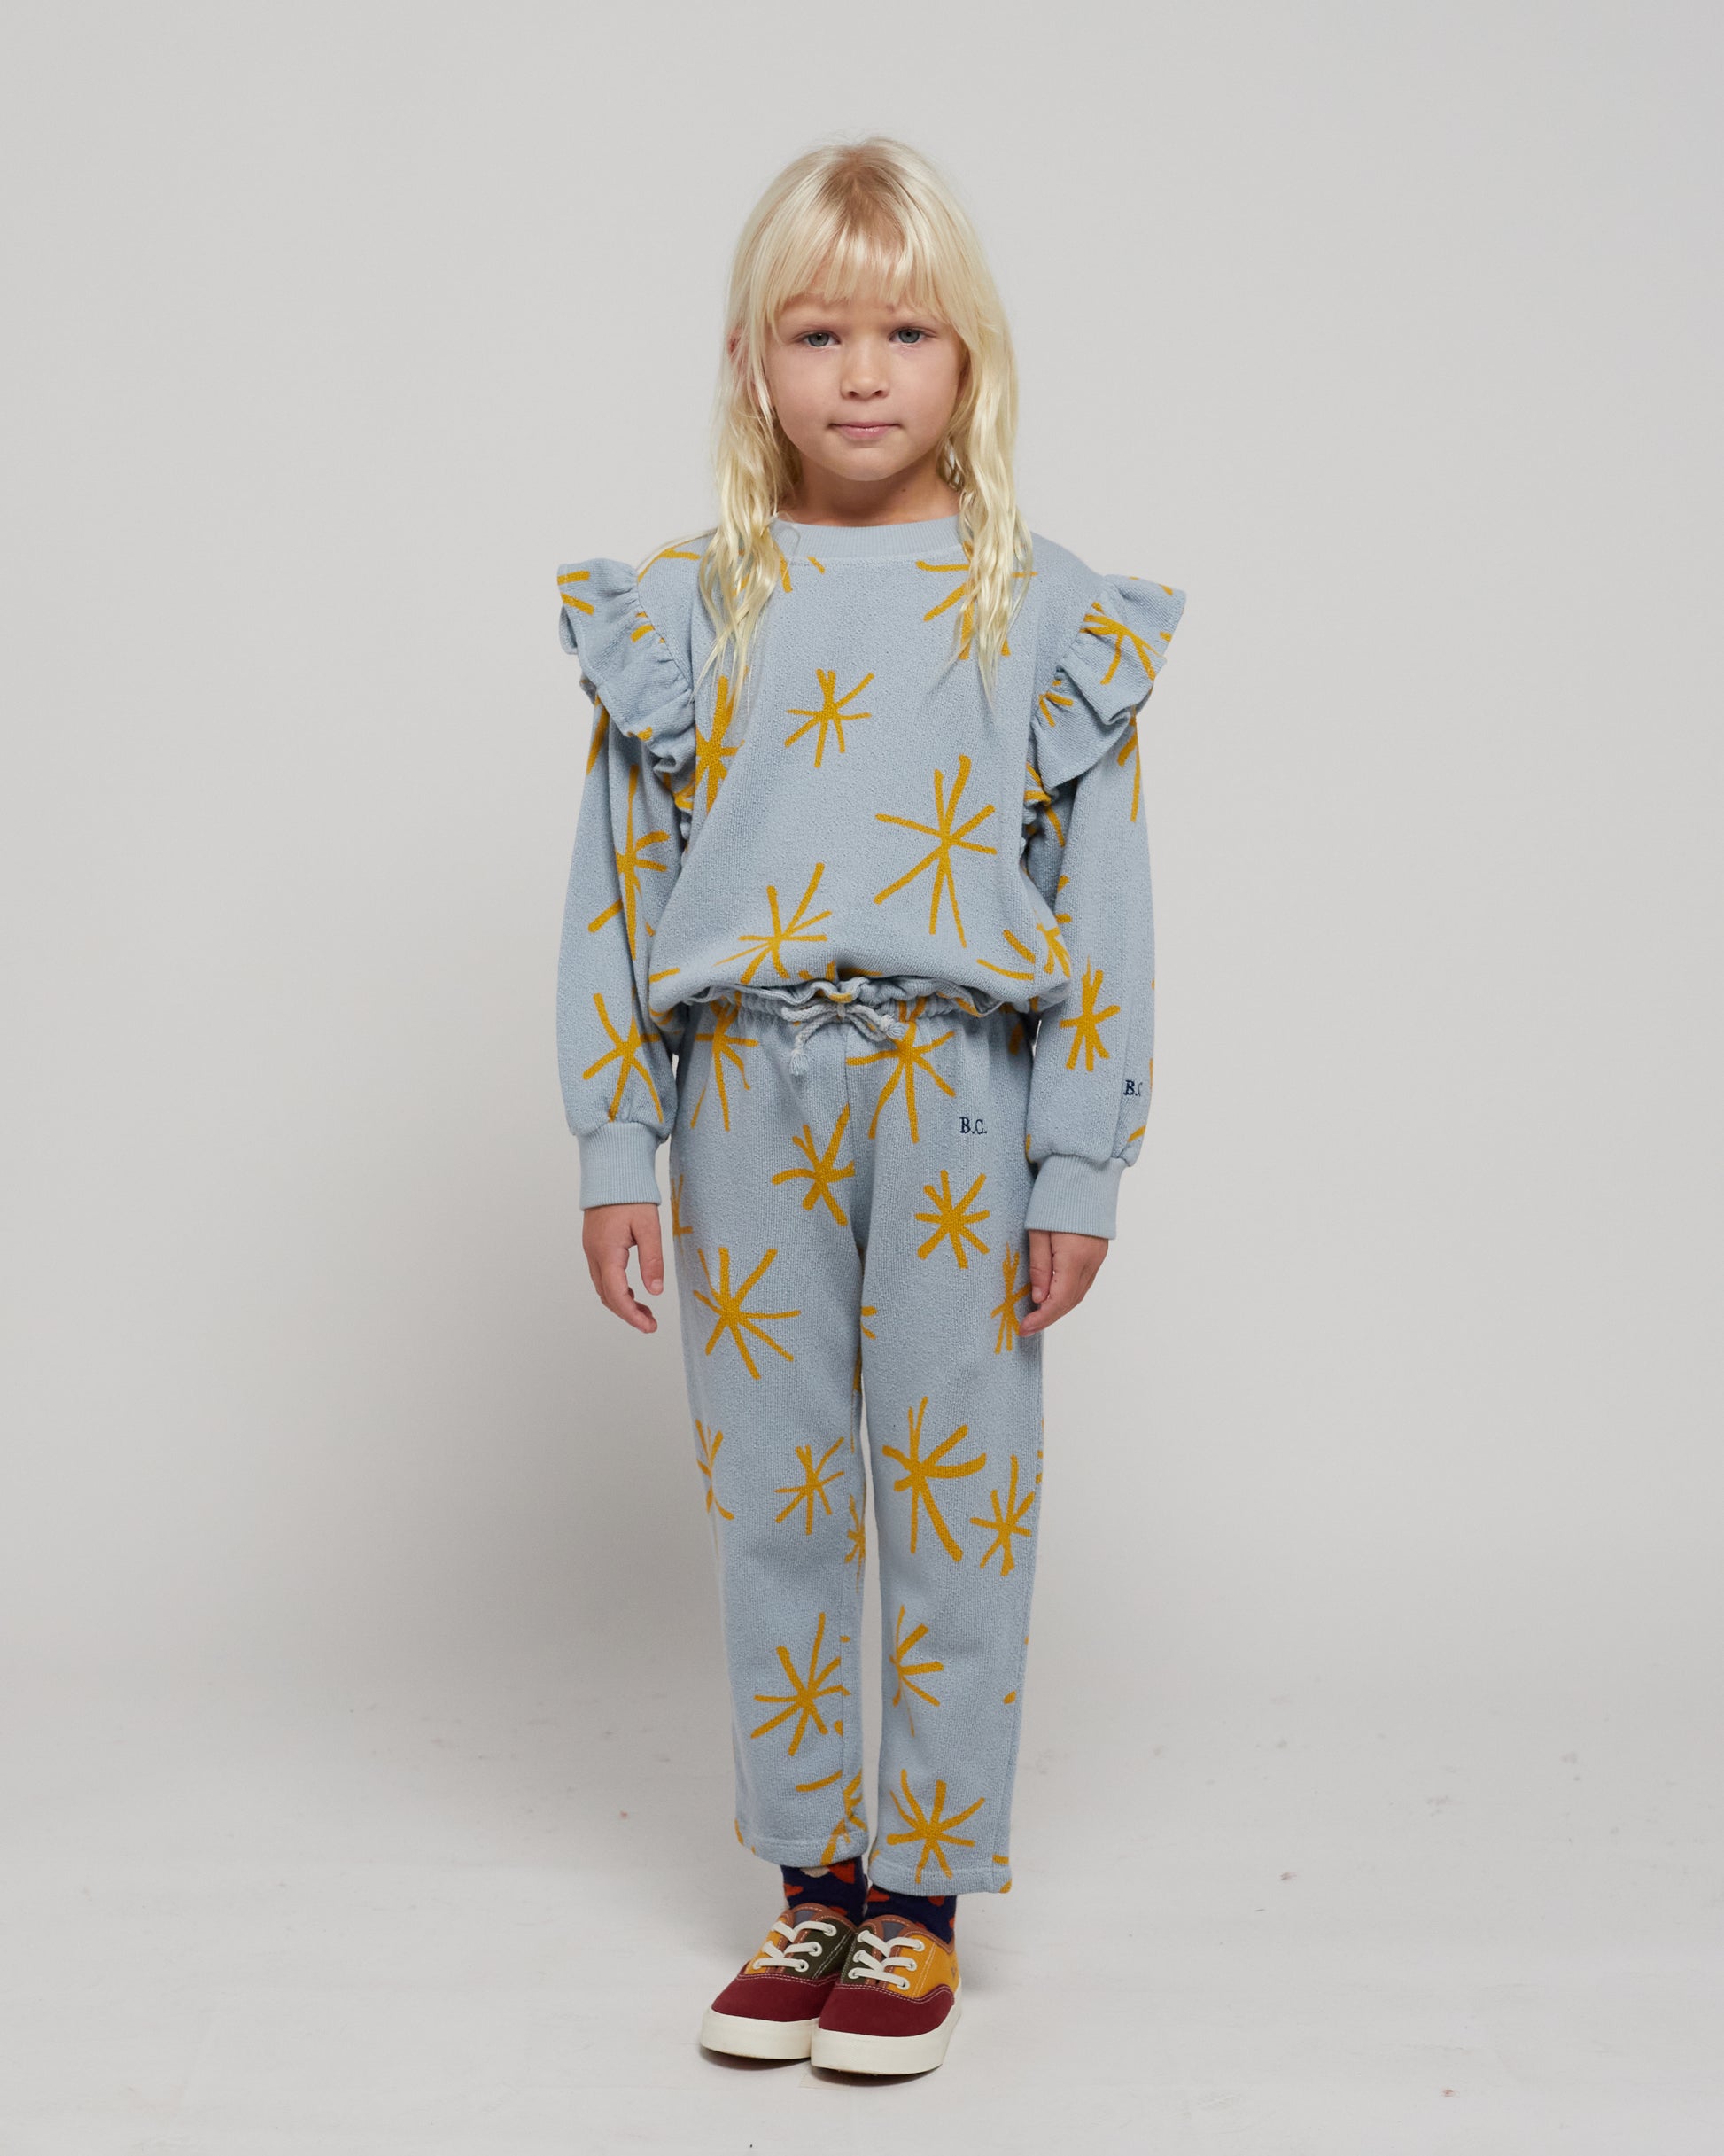 Sparkle Jogging Pants by Bobo Choses. 100% BCI cotton powder blue jogging pants with yellow sparkle print. Designed with adjustable ruffled waistband, ankle length and sooo soft inside. It has a baggy fit. Made ethically and sustainably in Portugal for Bobo Choses.